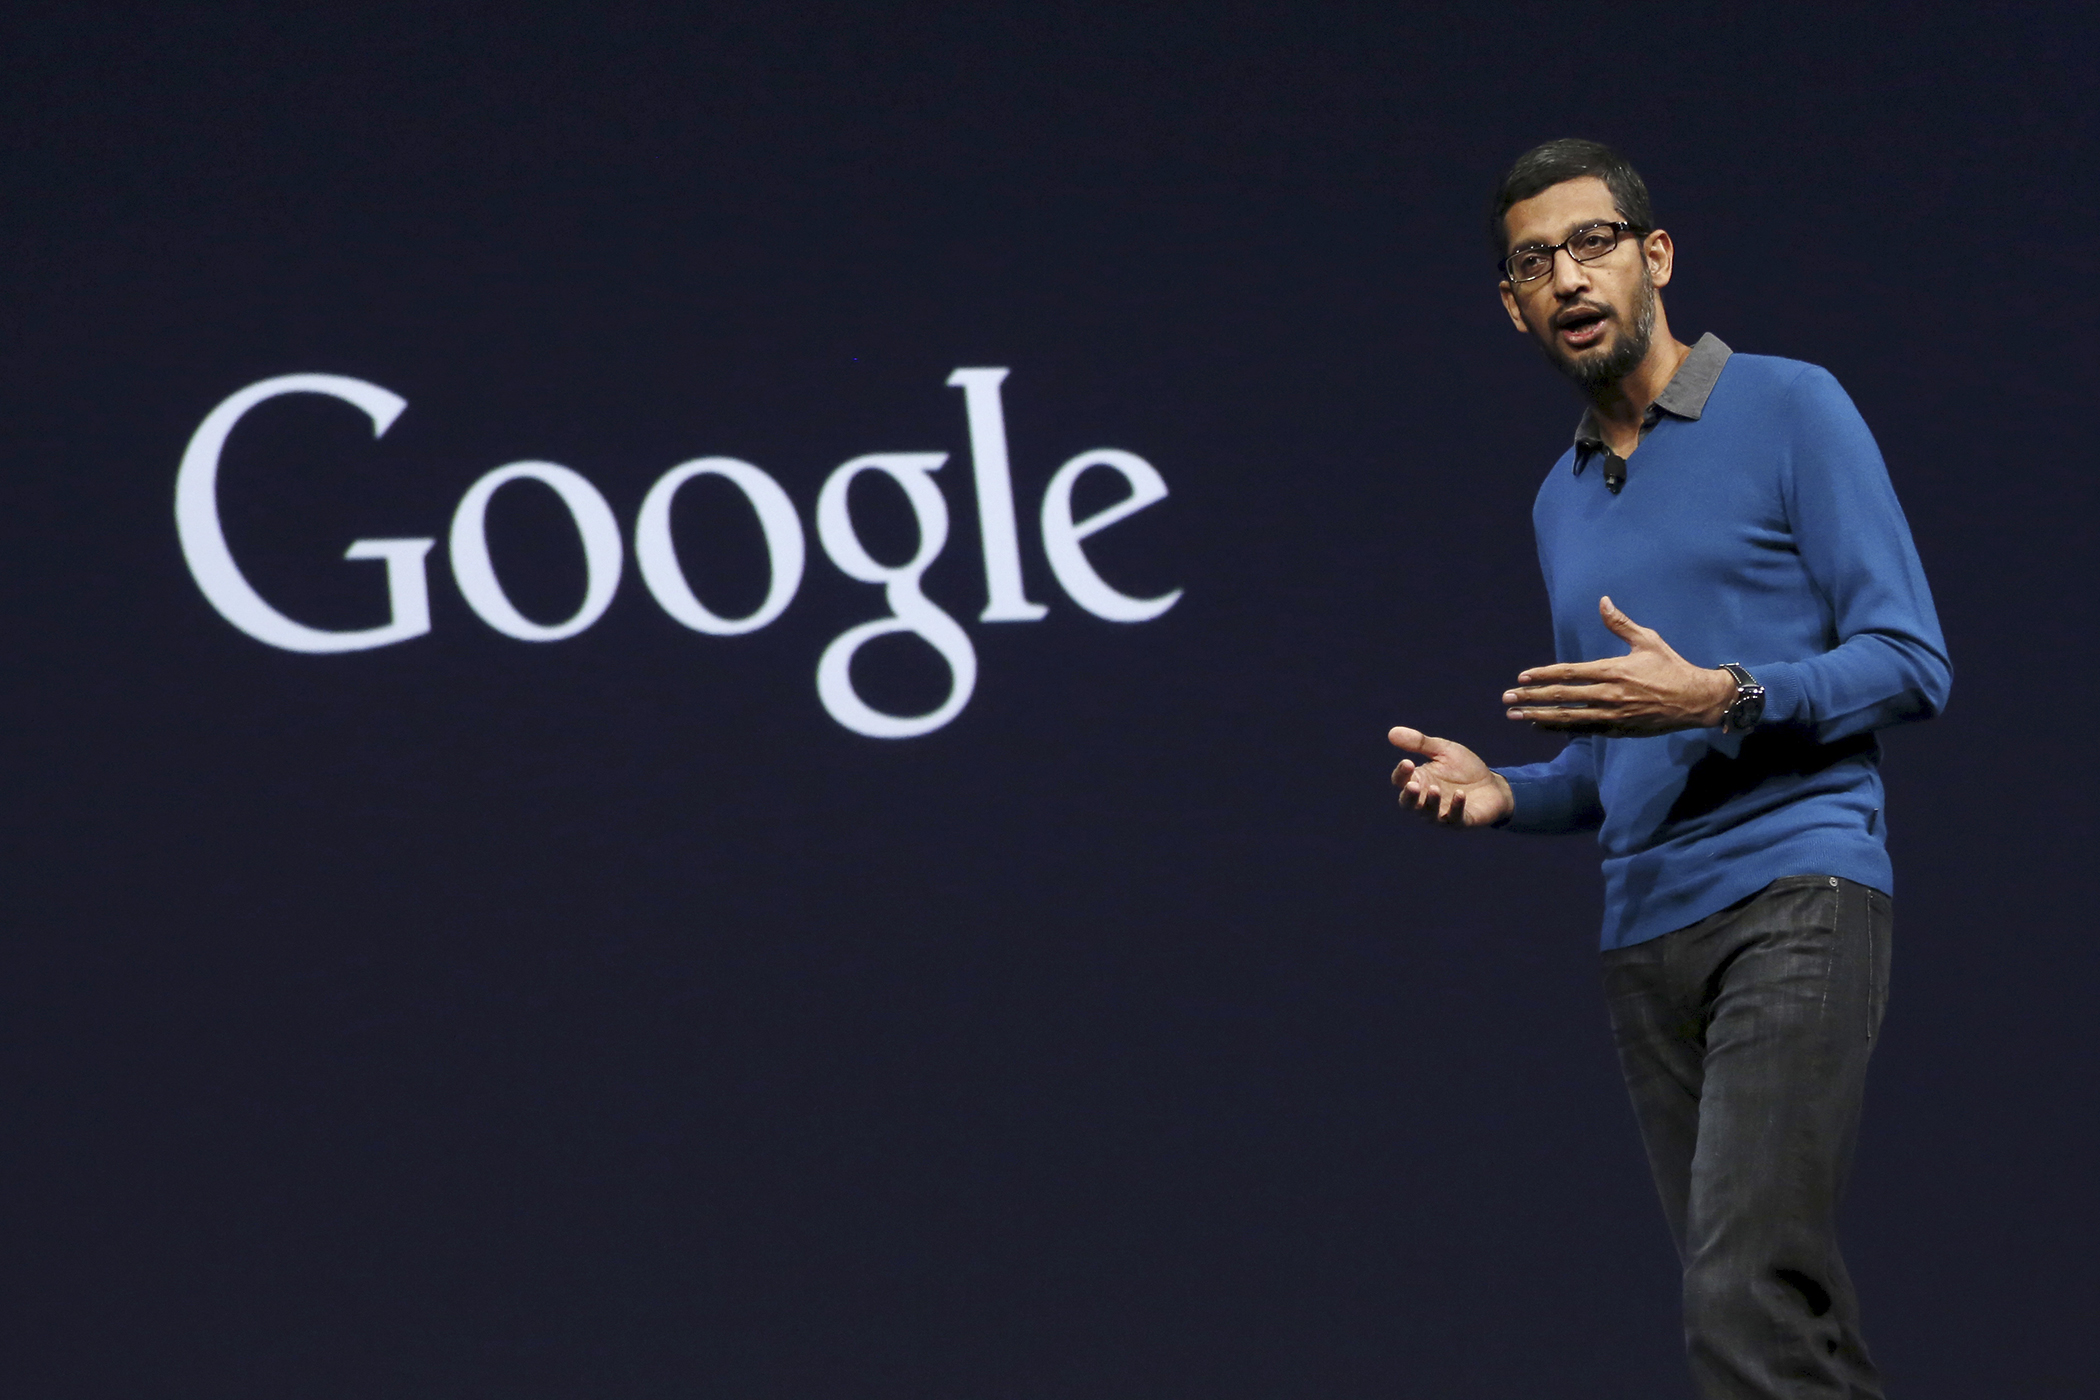 Sundar Pichai, Senior Vice President for Products, delivers his keynote address during the Google I/O developers conference in San Francisco, California May 28, 2015.